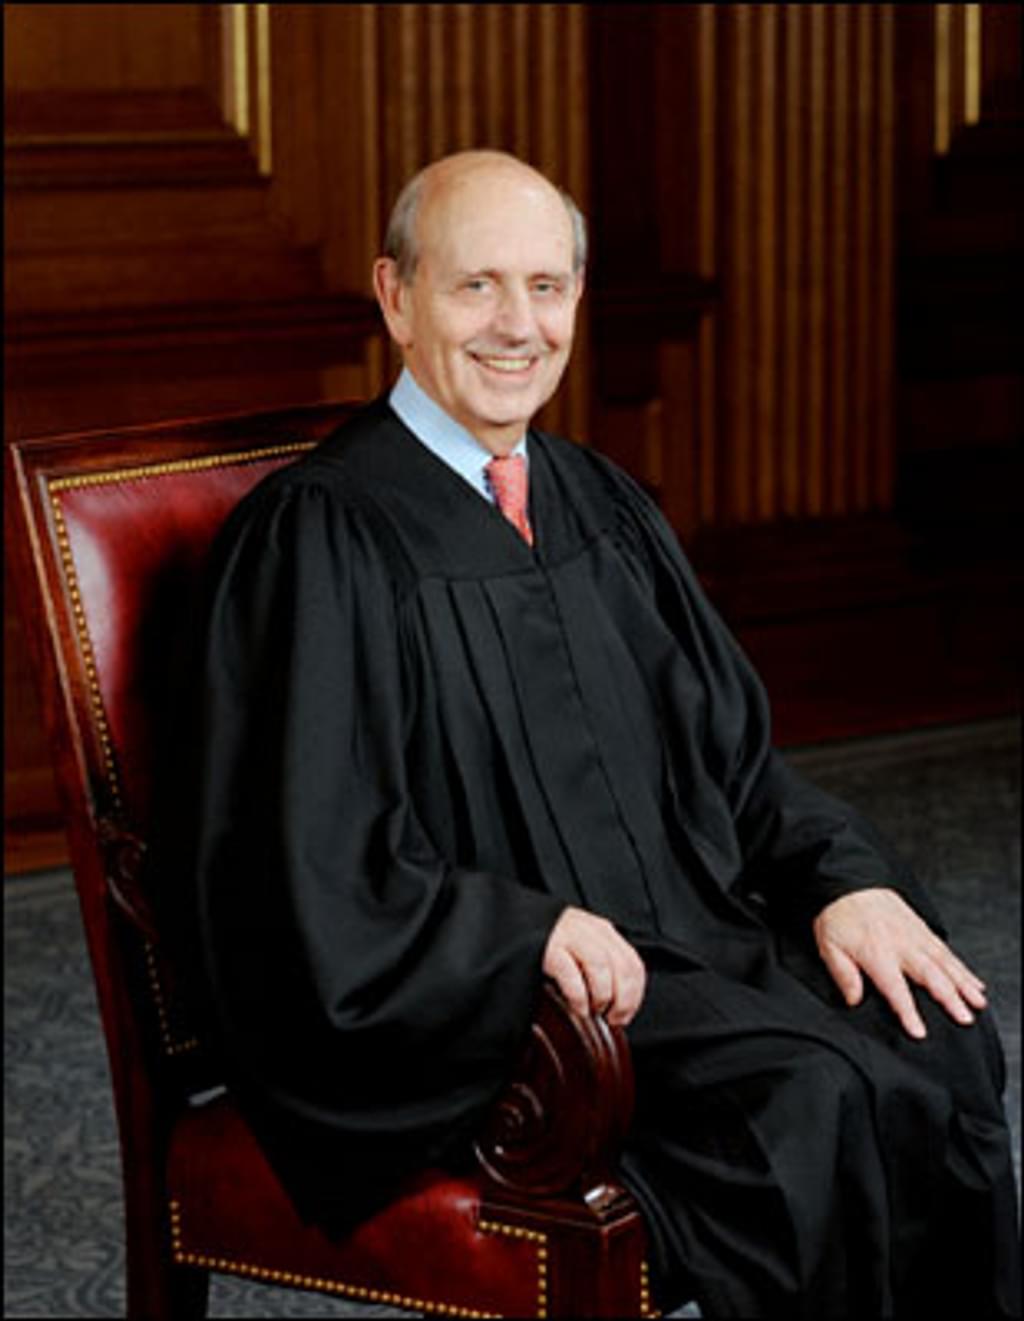 As Supreme Court Rejects Death Penalty Petitions, Justice Breyer Renews Call For Constitutional Review